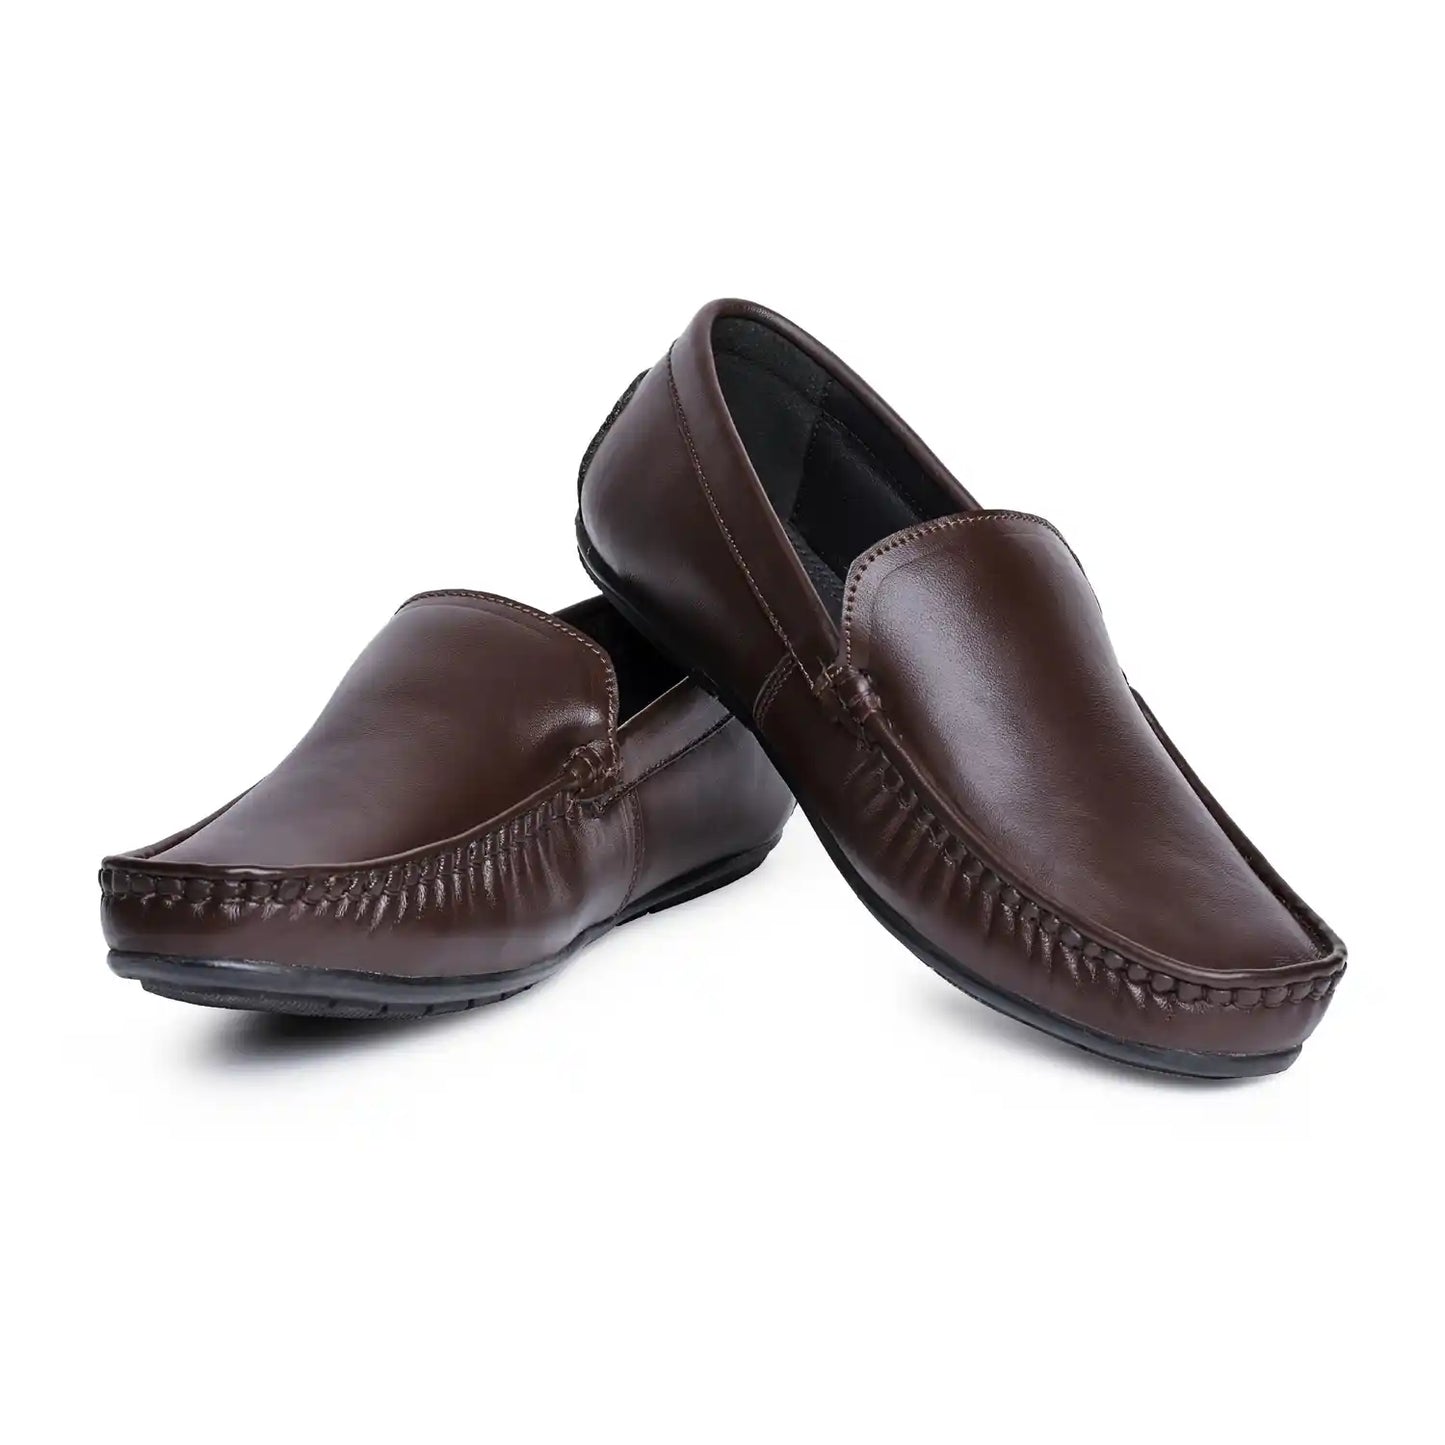 Loafers for Men Pure Leather Moccasins